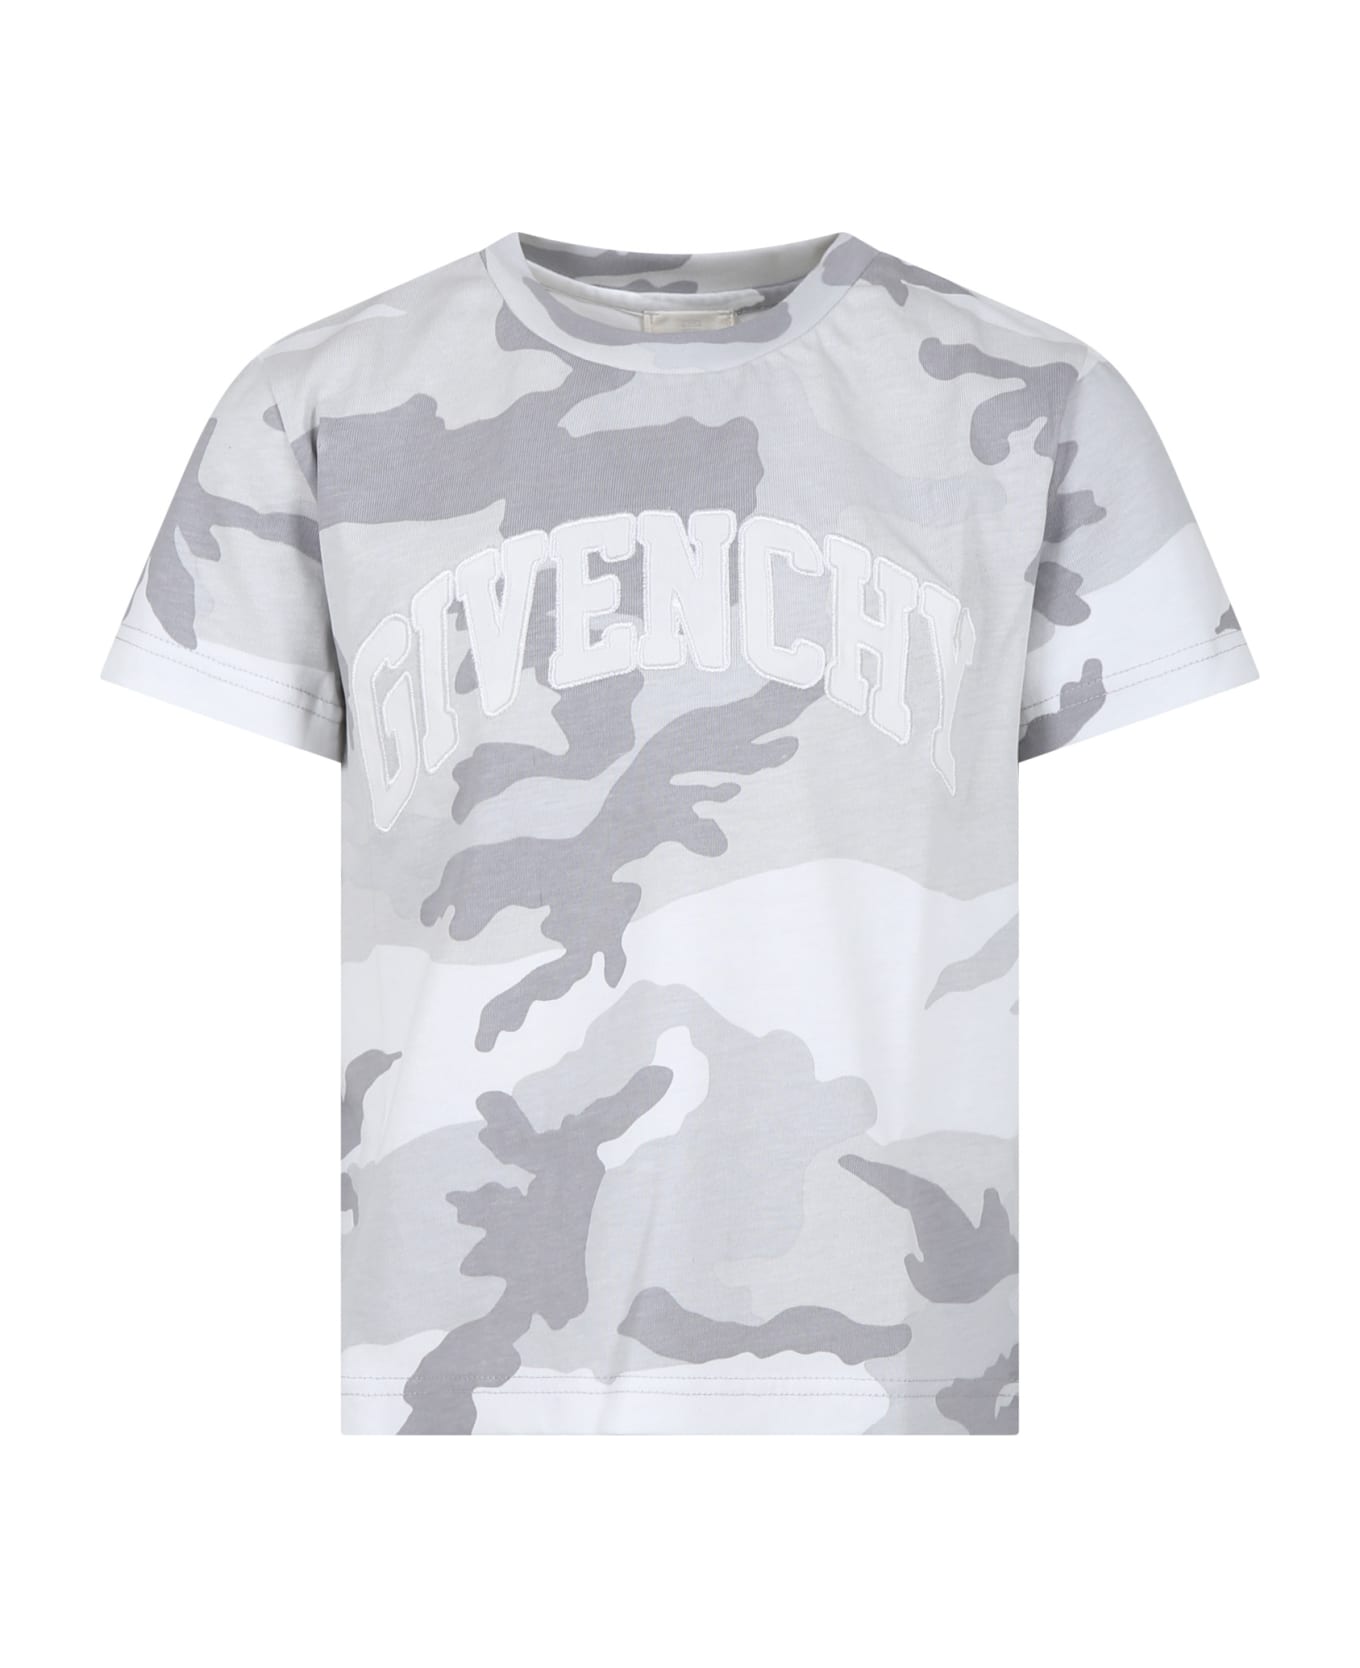 Givenchy Gray T-shirt For Boy With Camouflage Print - Grigio Bianco